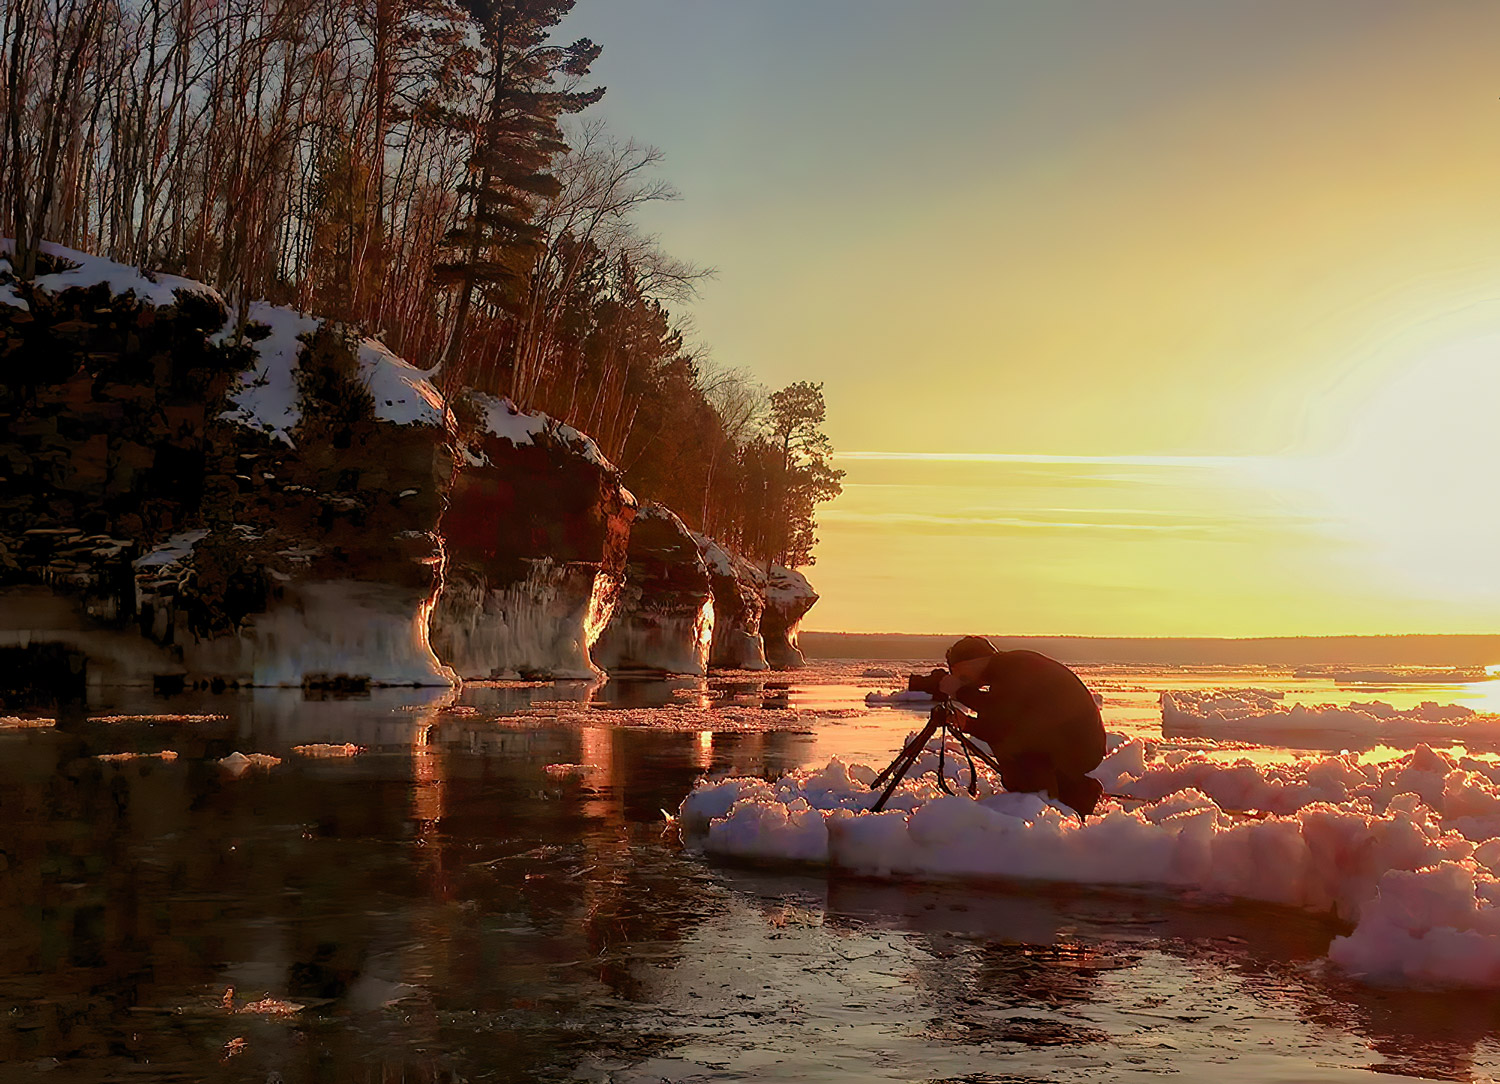 apostle islands ice caves with floating icebergs at sunset